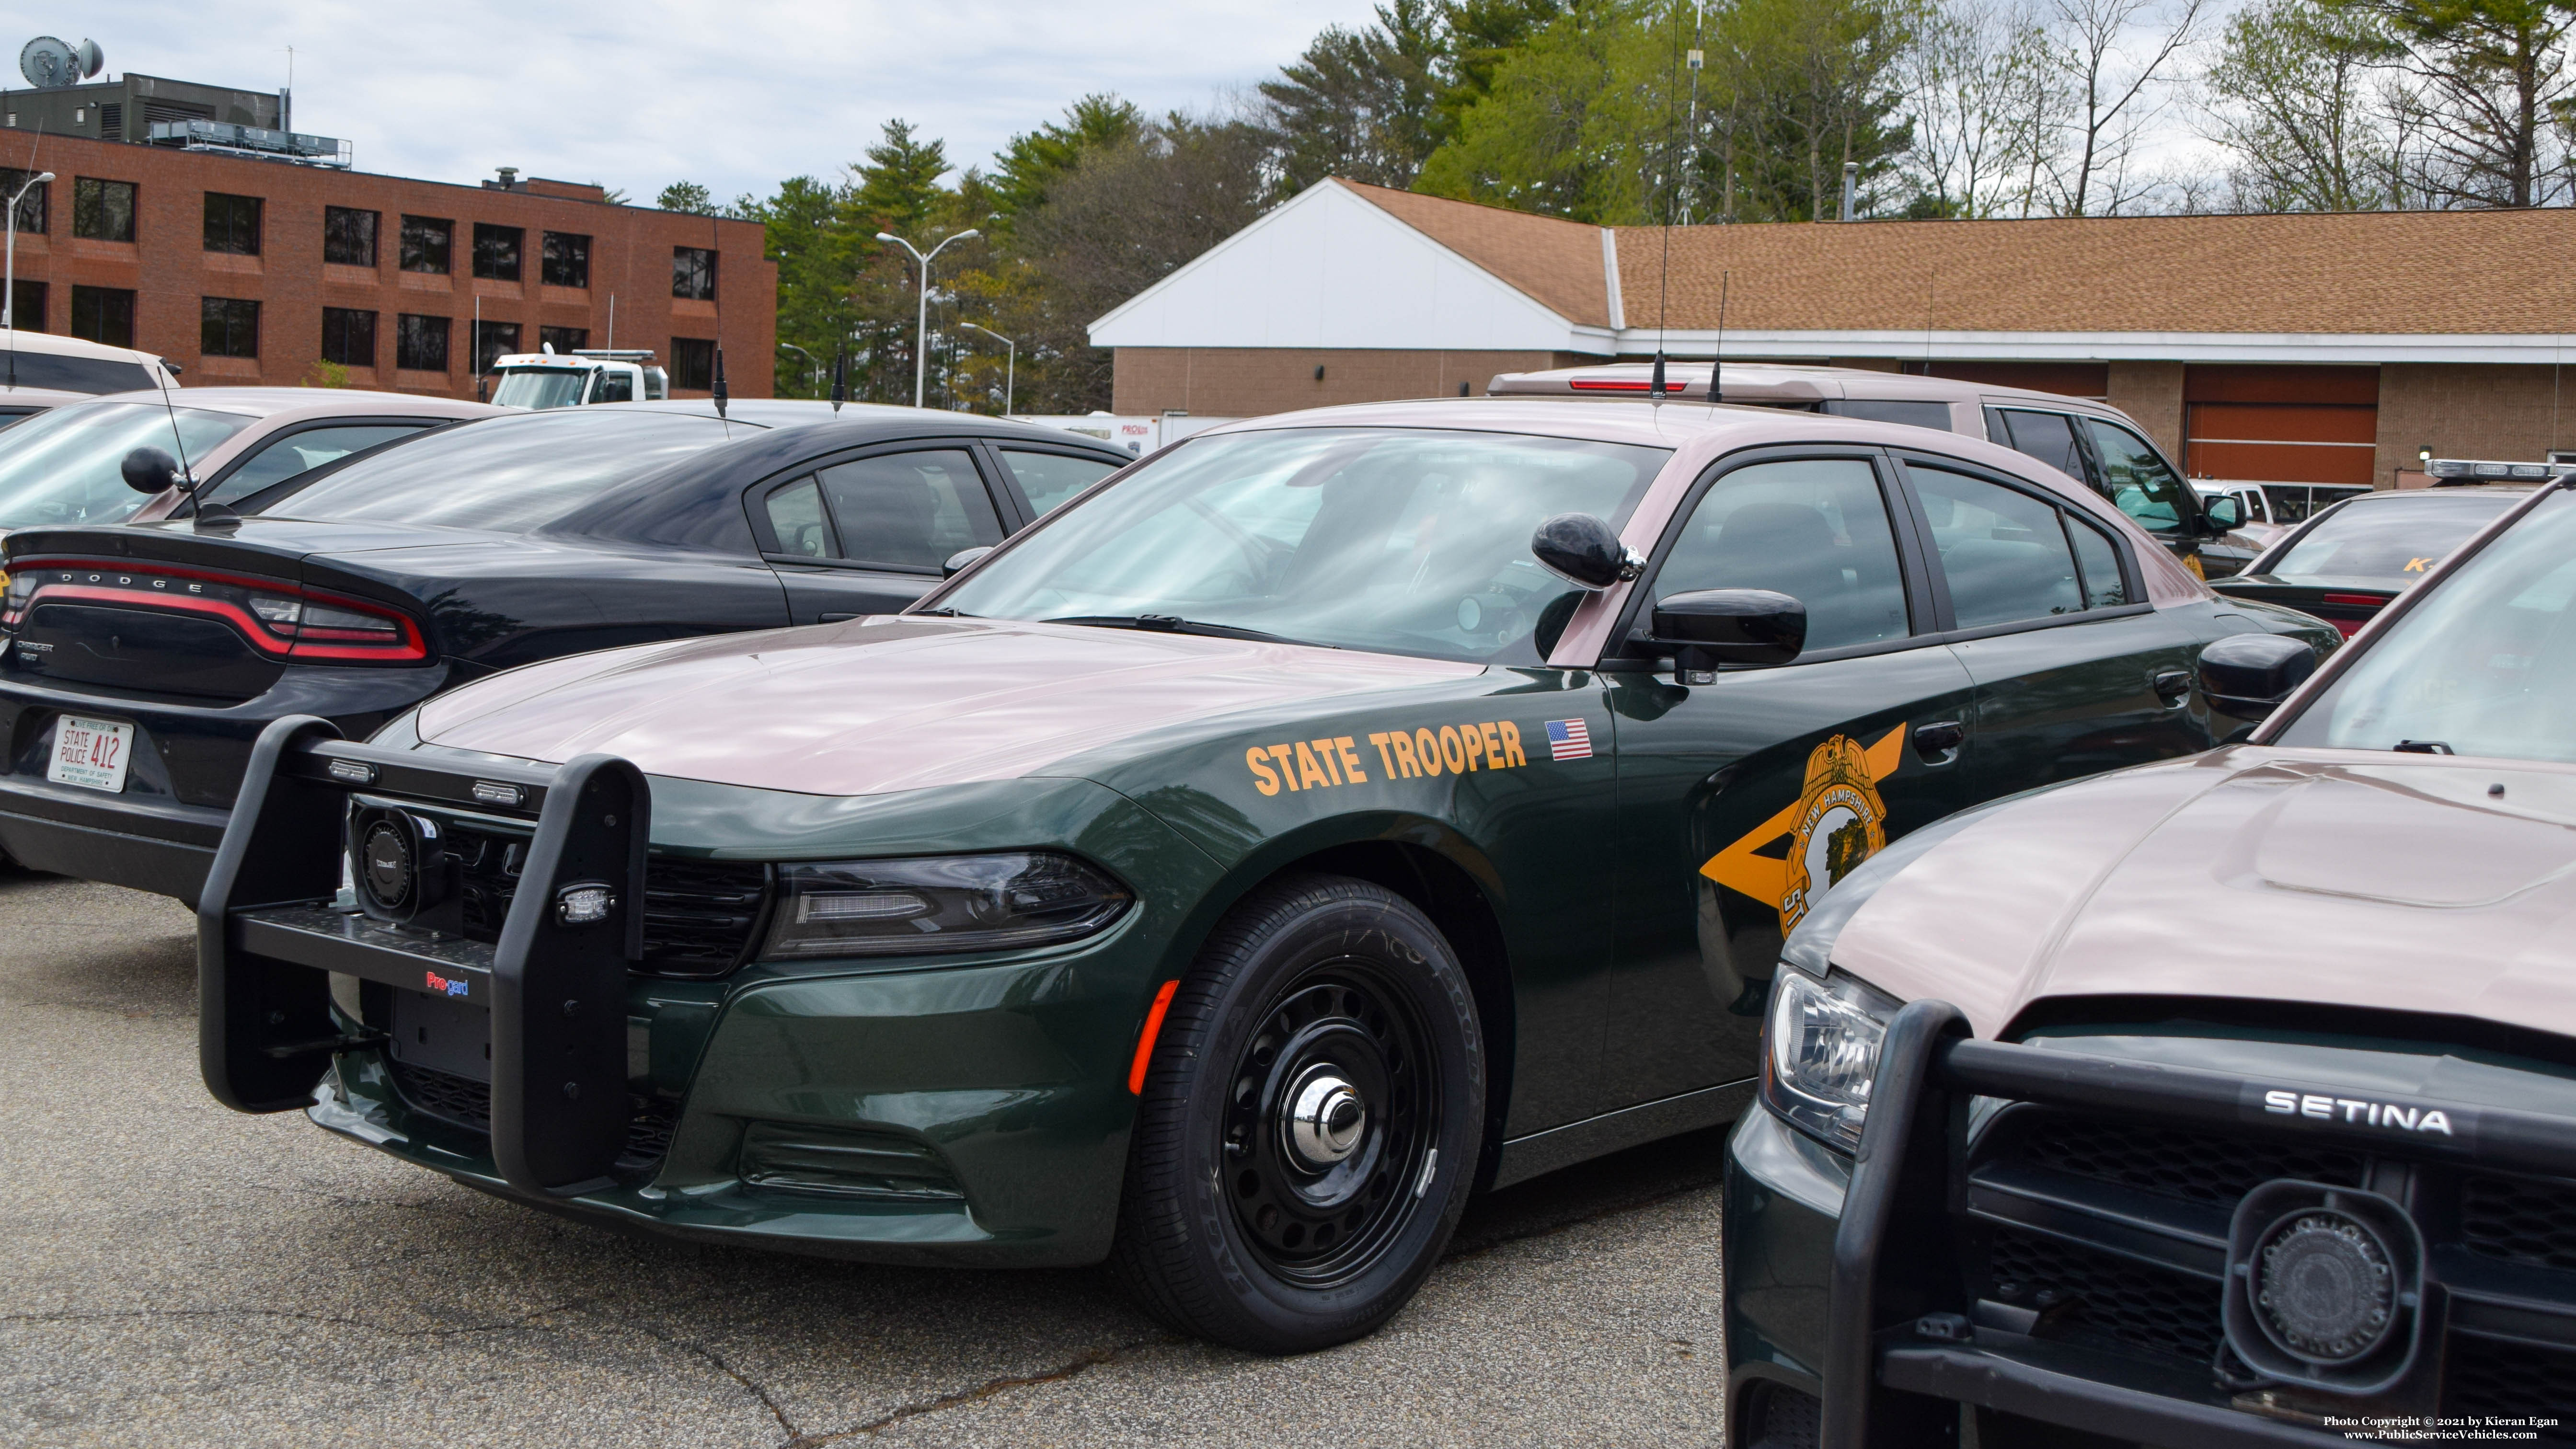 A photo  of New Hampshire State Police
            Cruiser 105, a 2020 Dodge Charger             taken by Kieran Egan